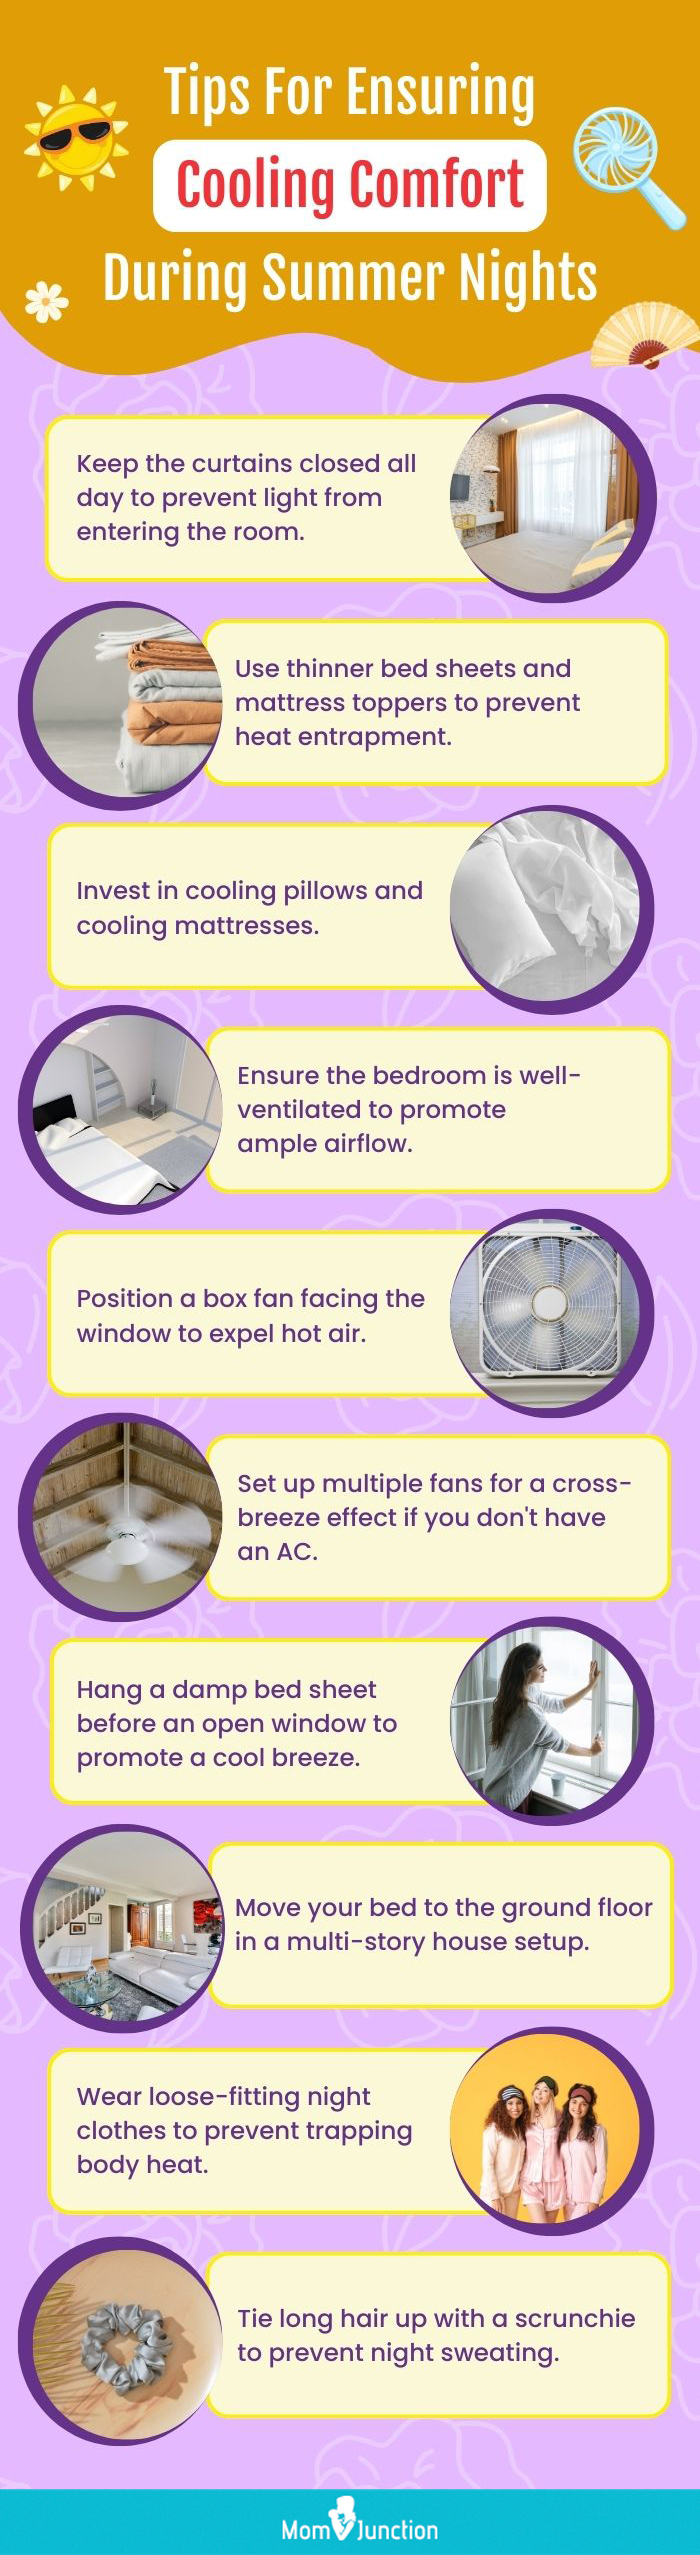 Tips For Ensuring Cooling Comfort During Summer Nights (infographic)